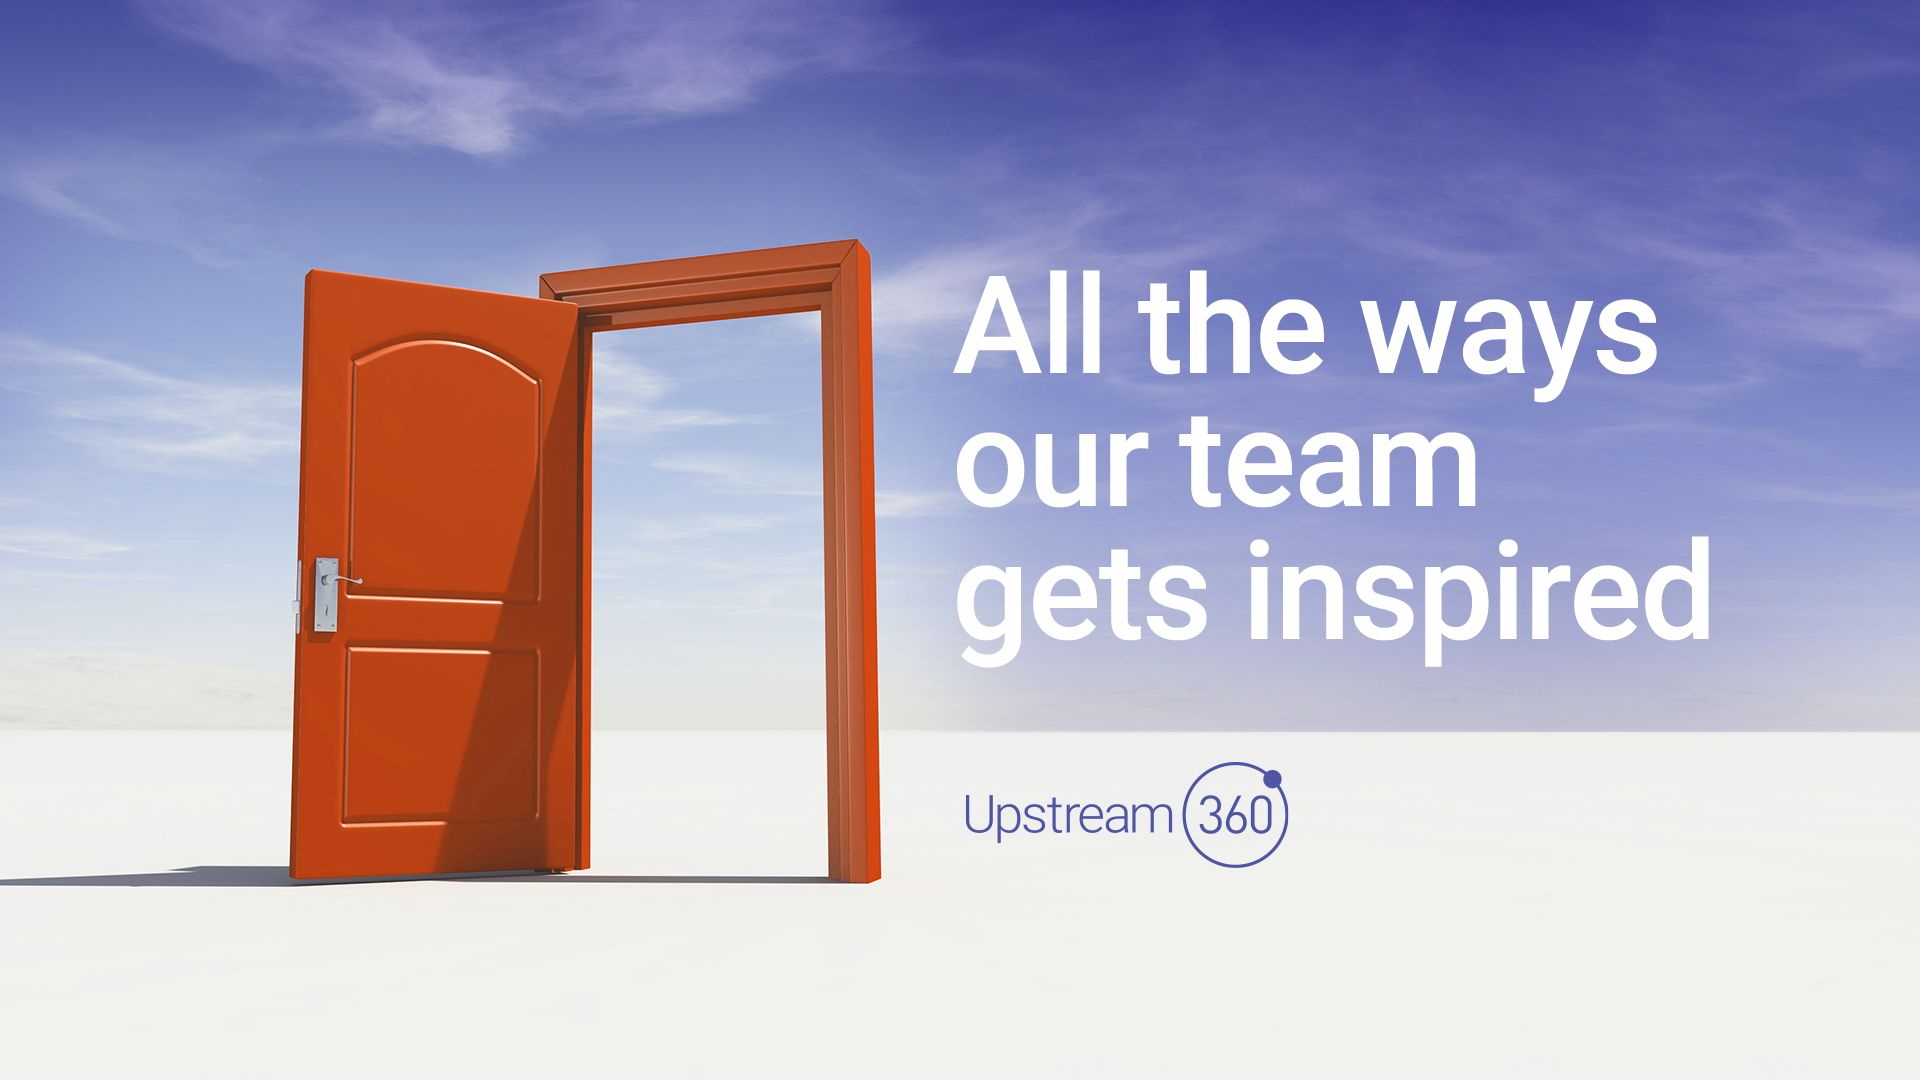 All the ways our team gets inspired